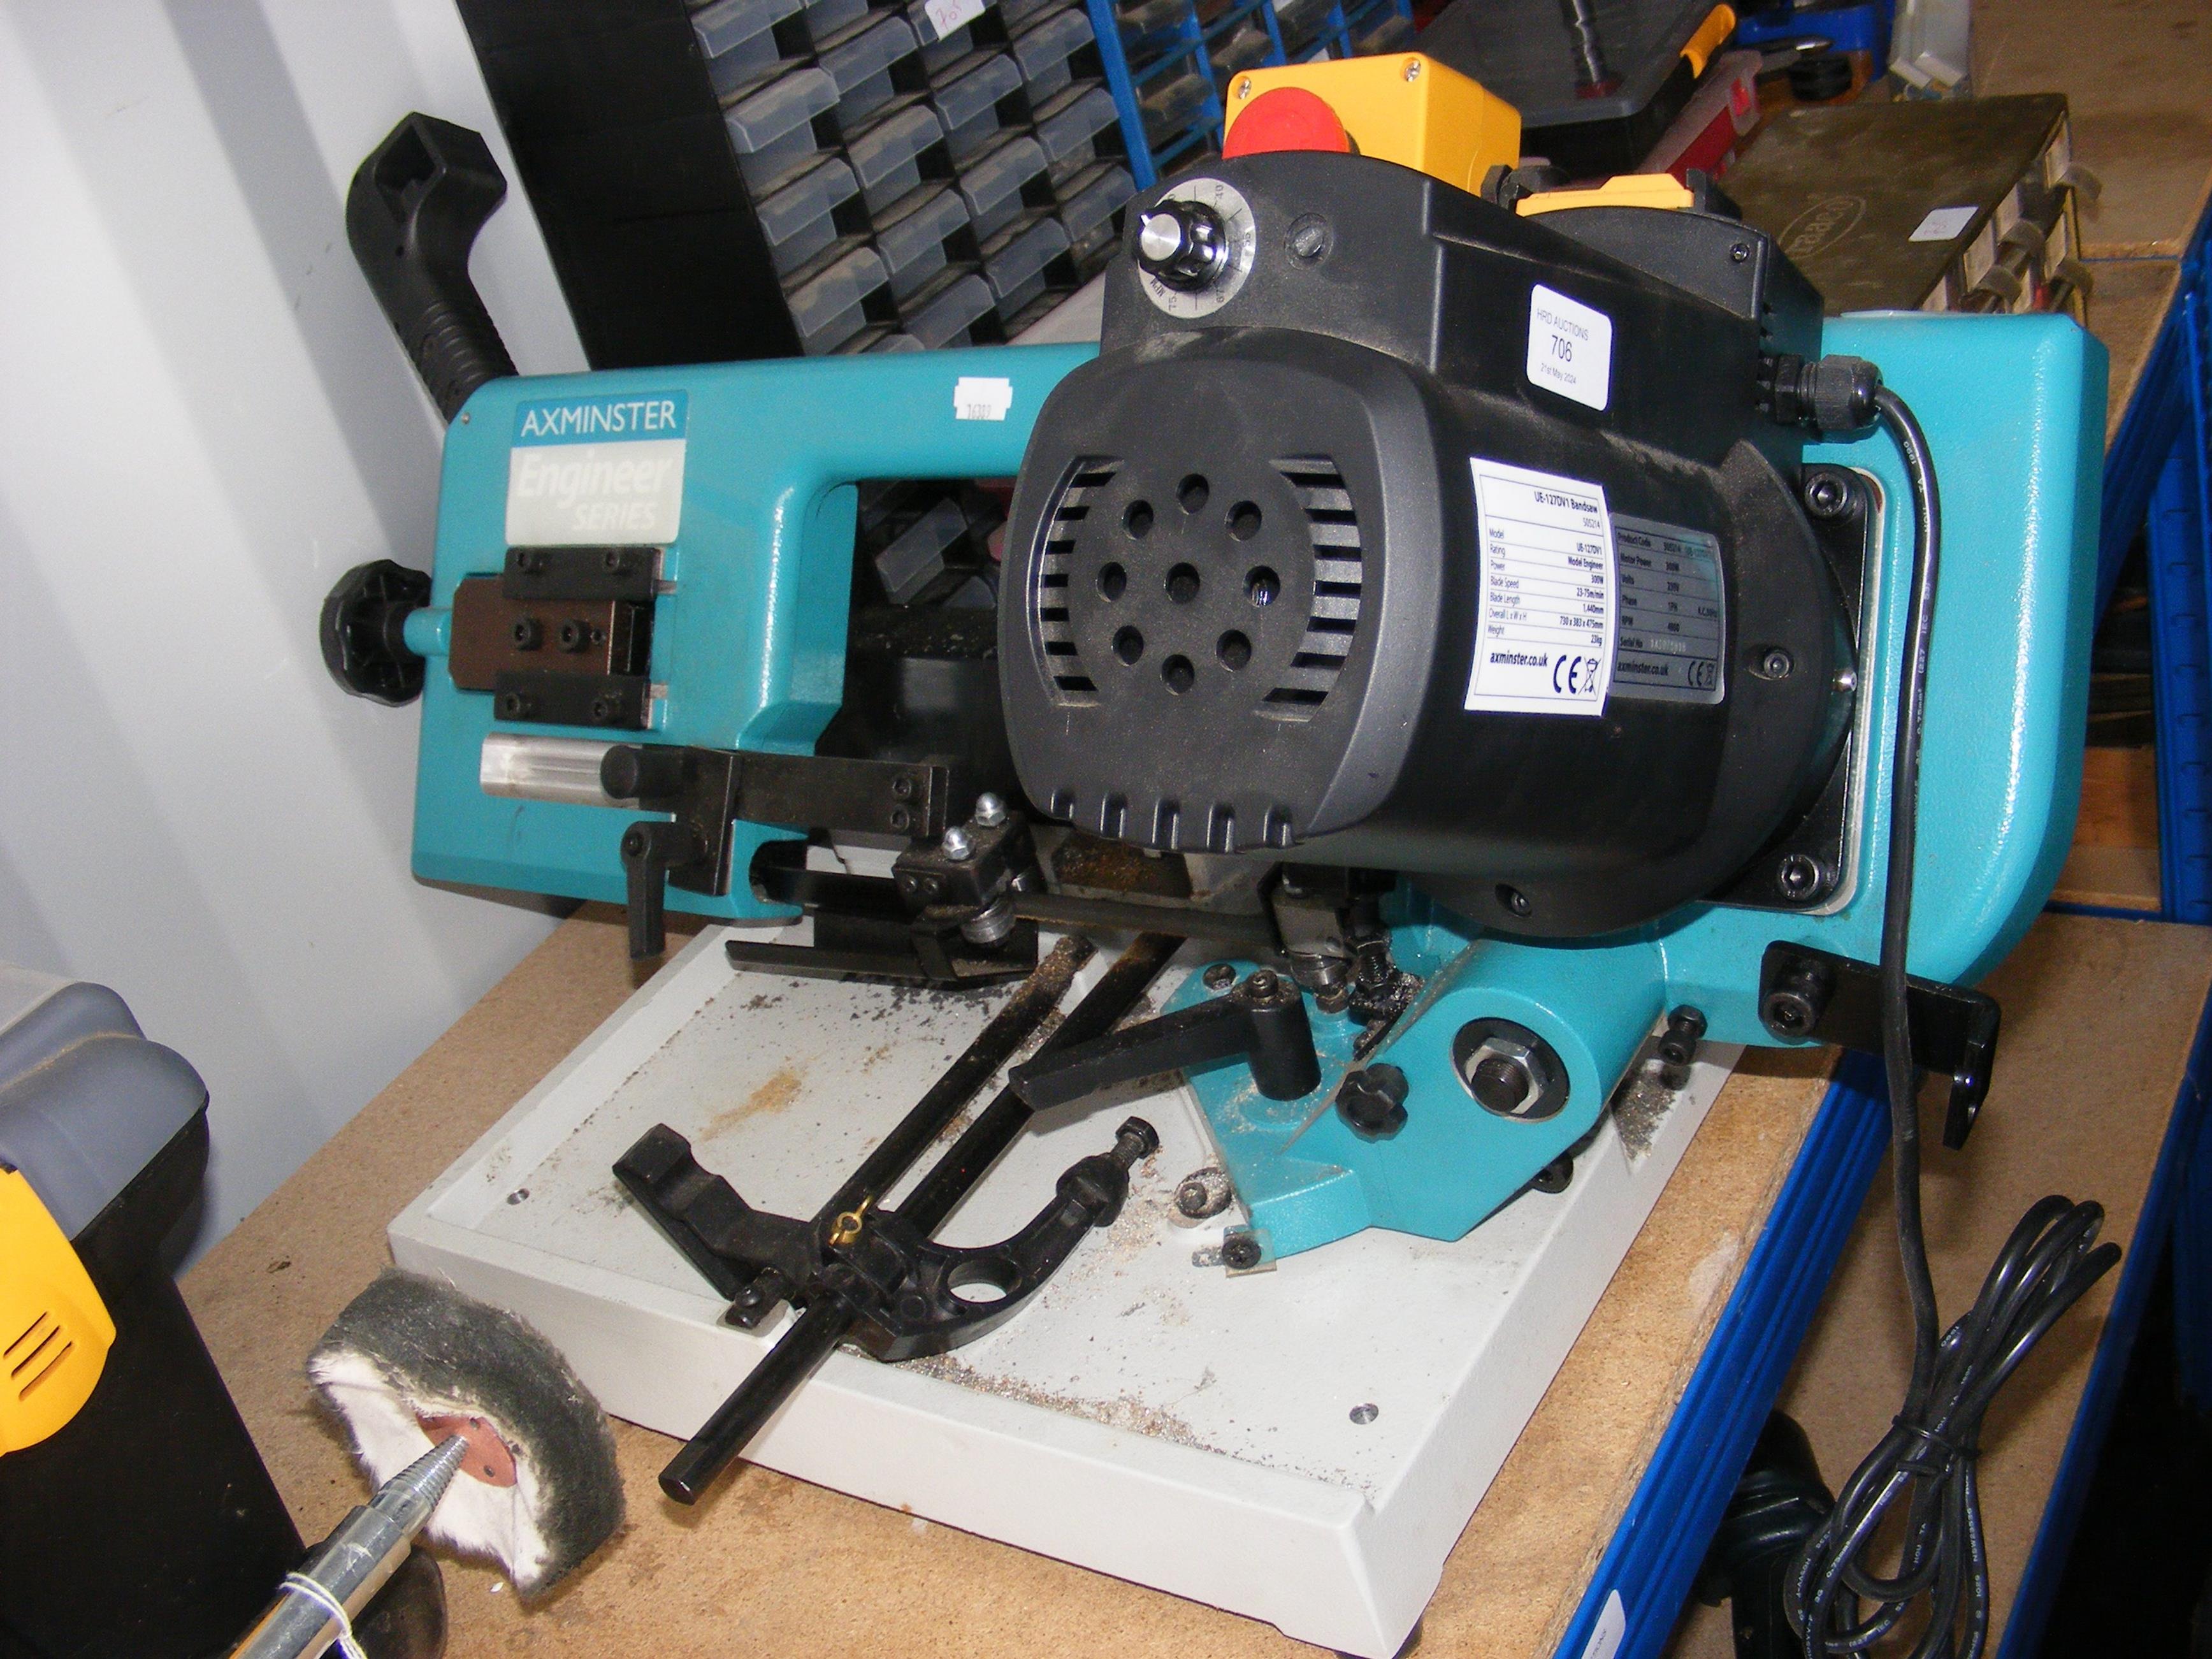 An Axminster bench mounted band saw